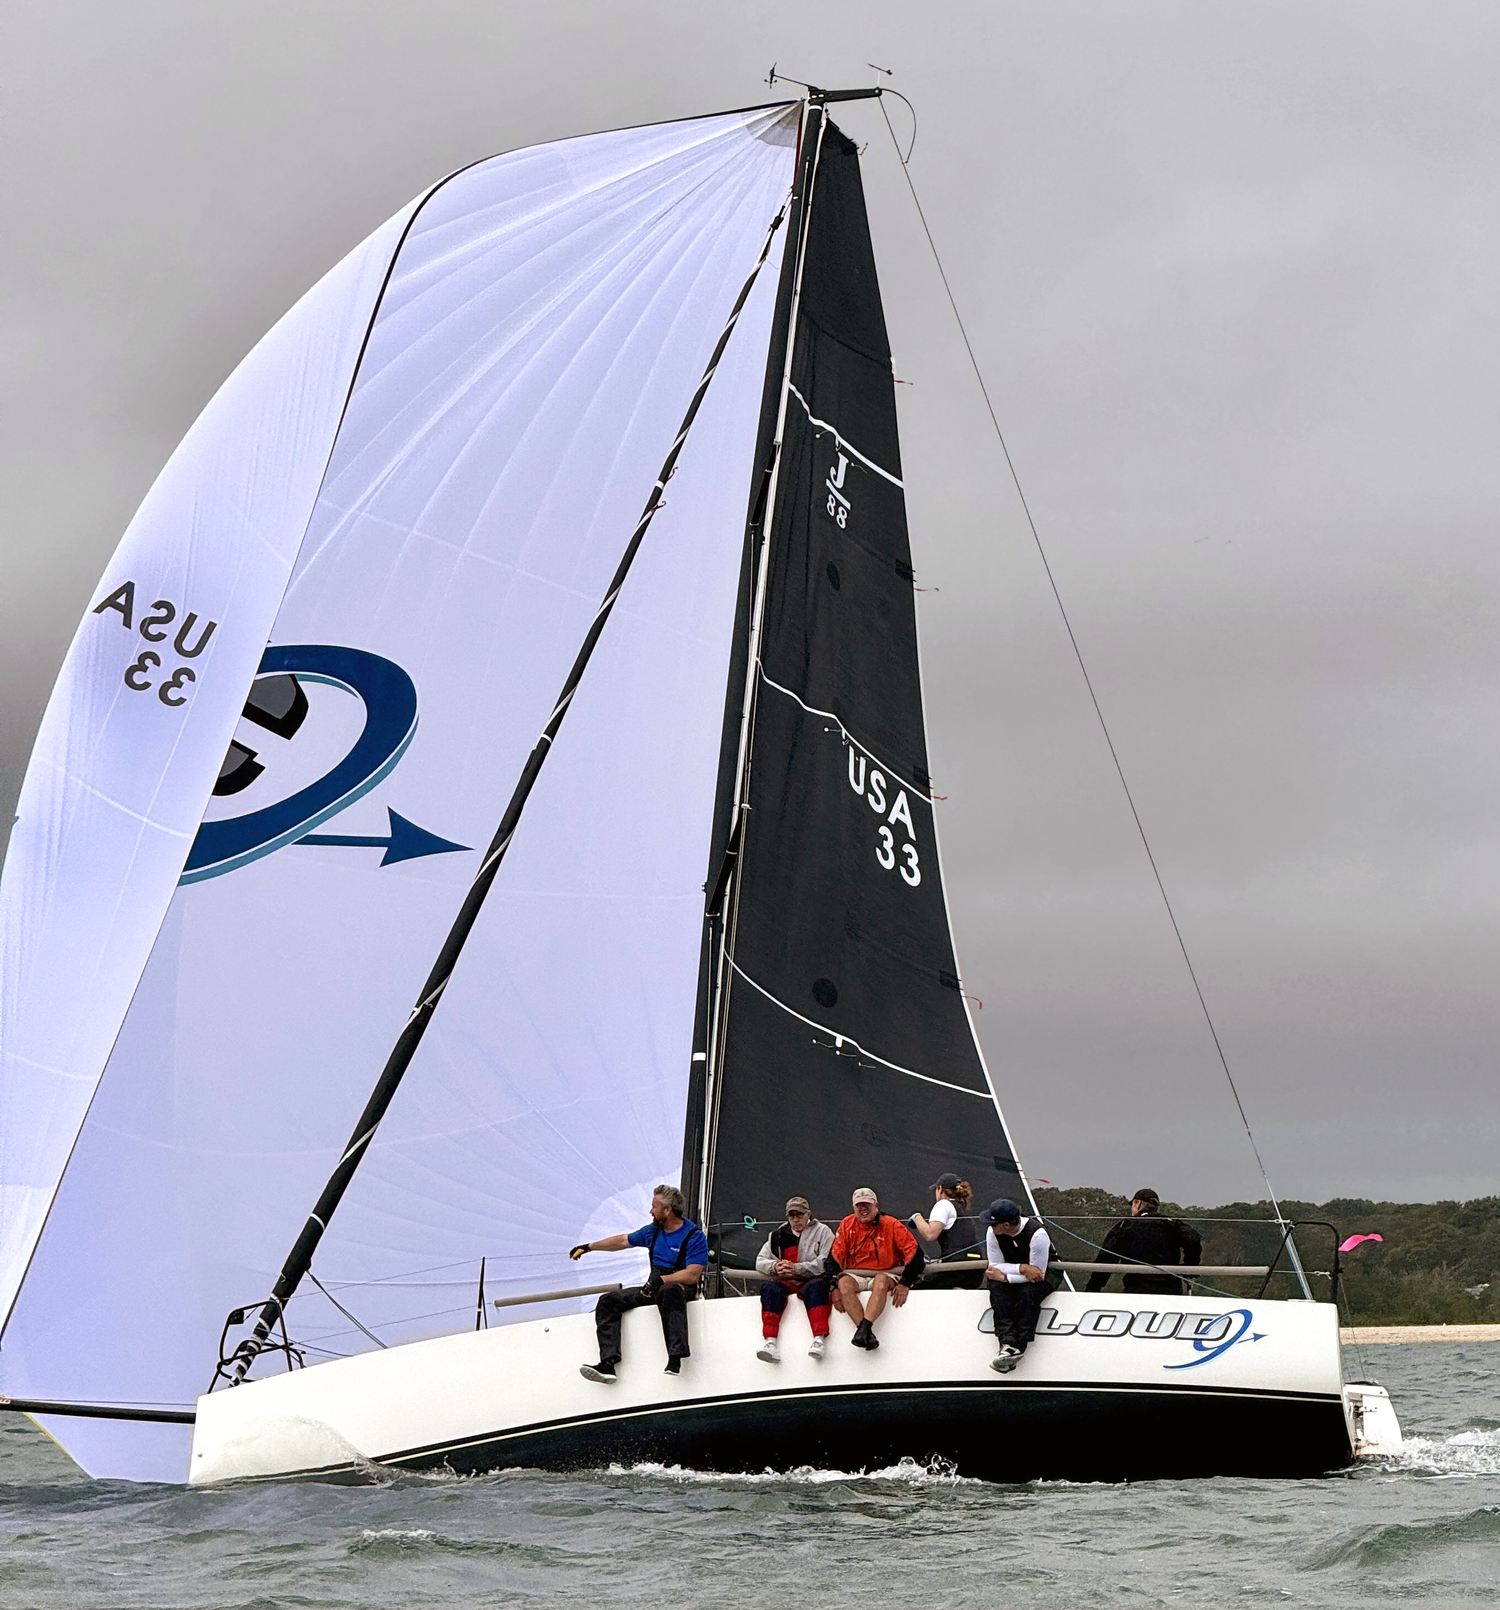 John Sommi, J-88 Cloud 9 skipper, managed a streamlined crew to a respectable third place in spinnaker Division 1.   MICHAEL MELLA